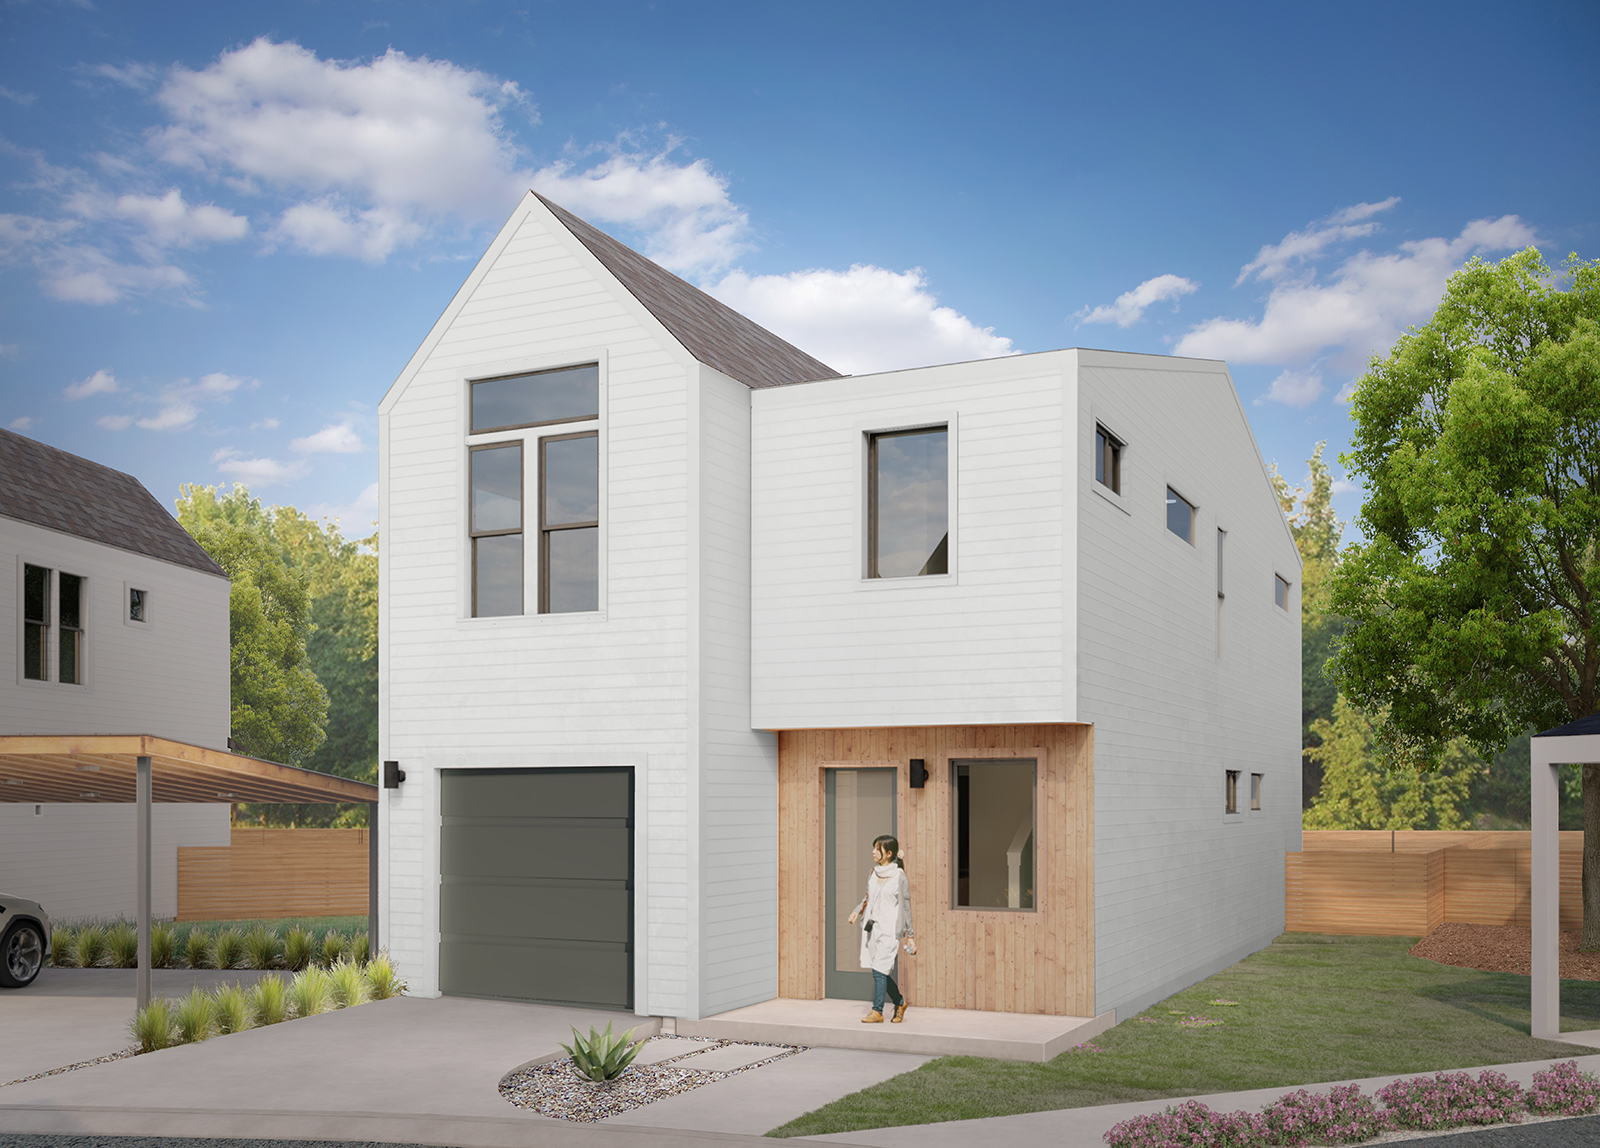 Clementine - Exterior Rendering - Plan A